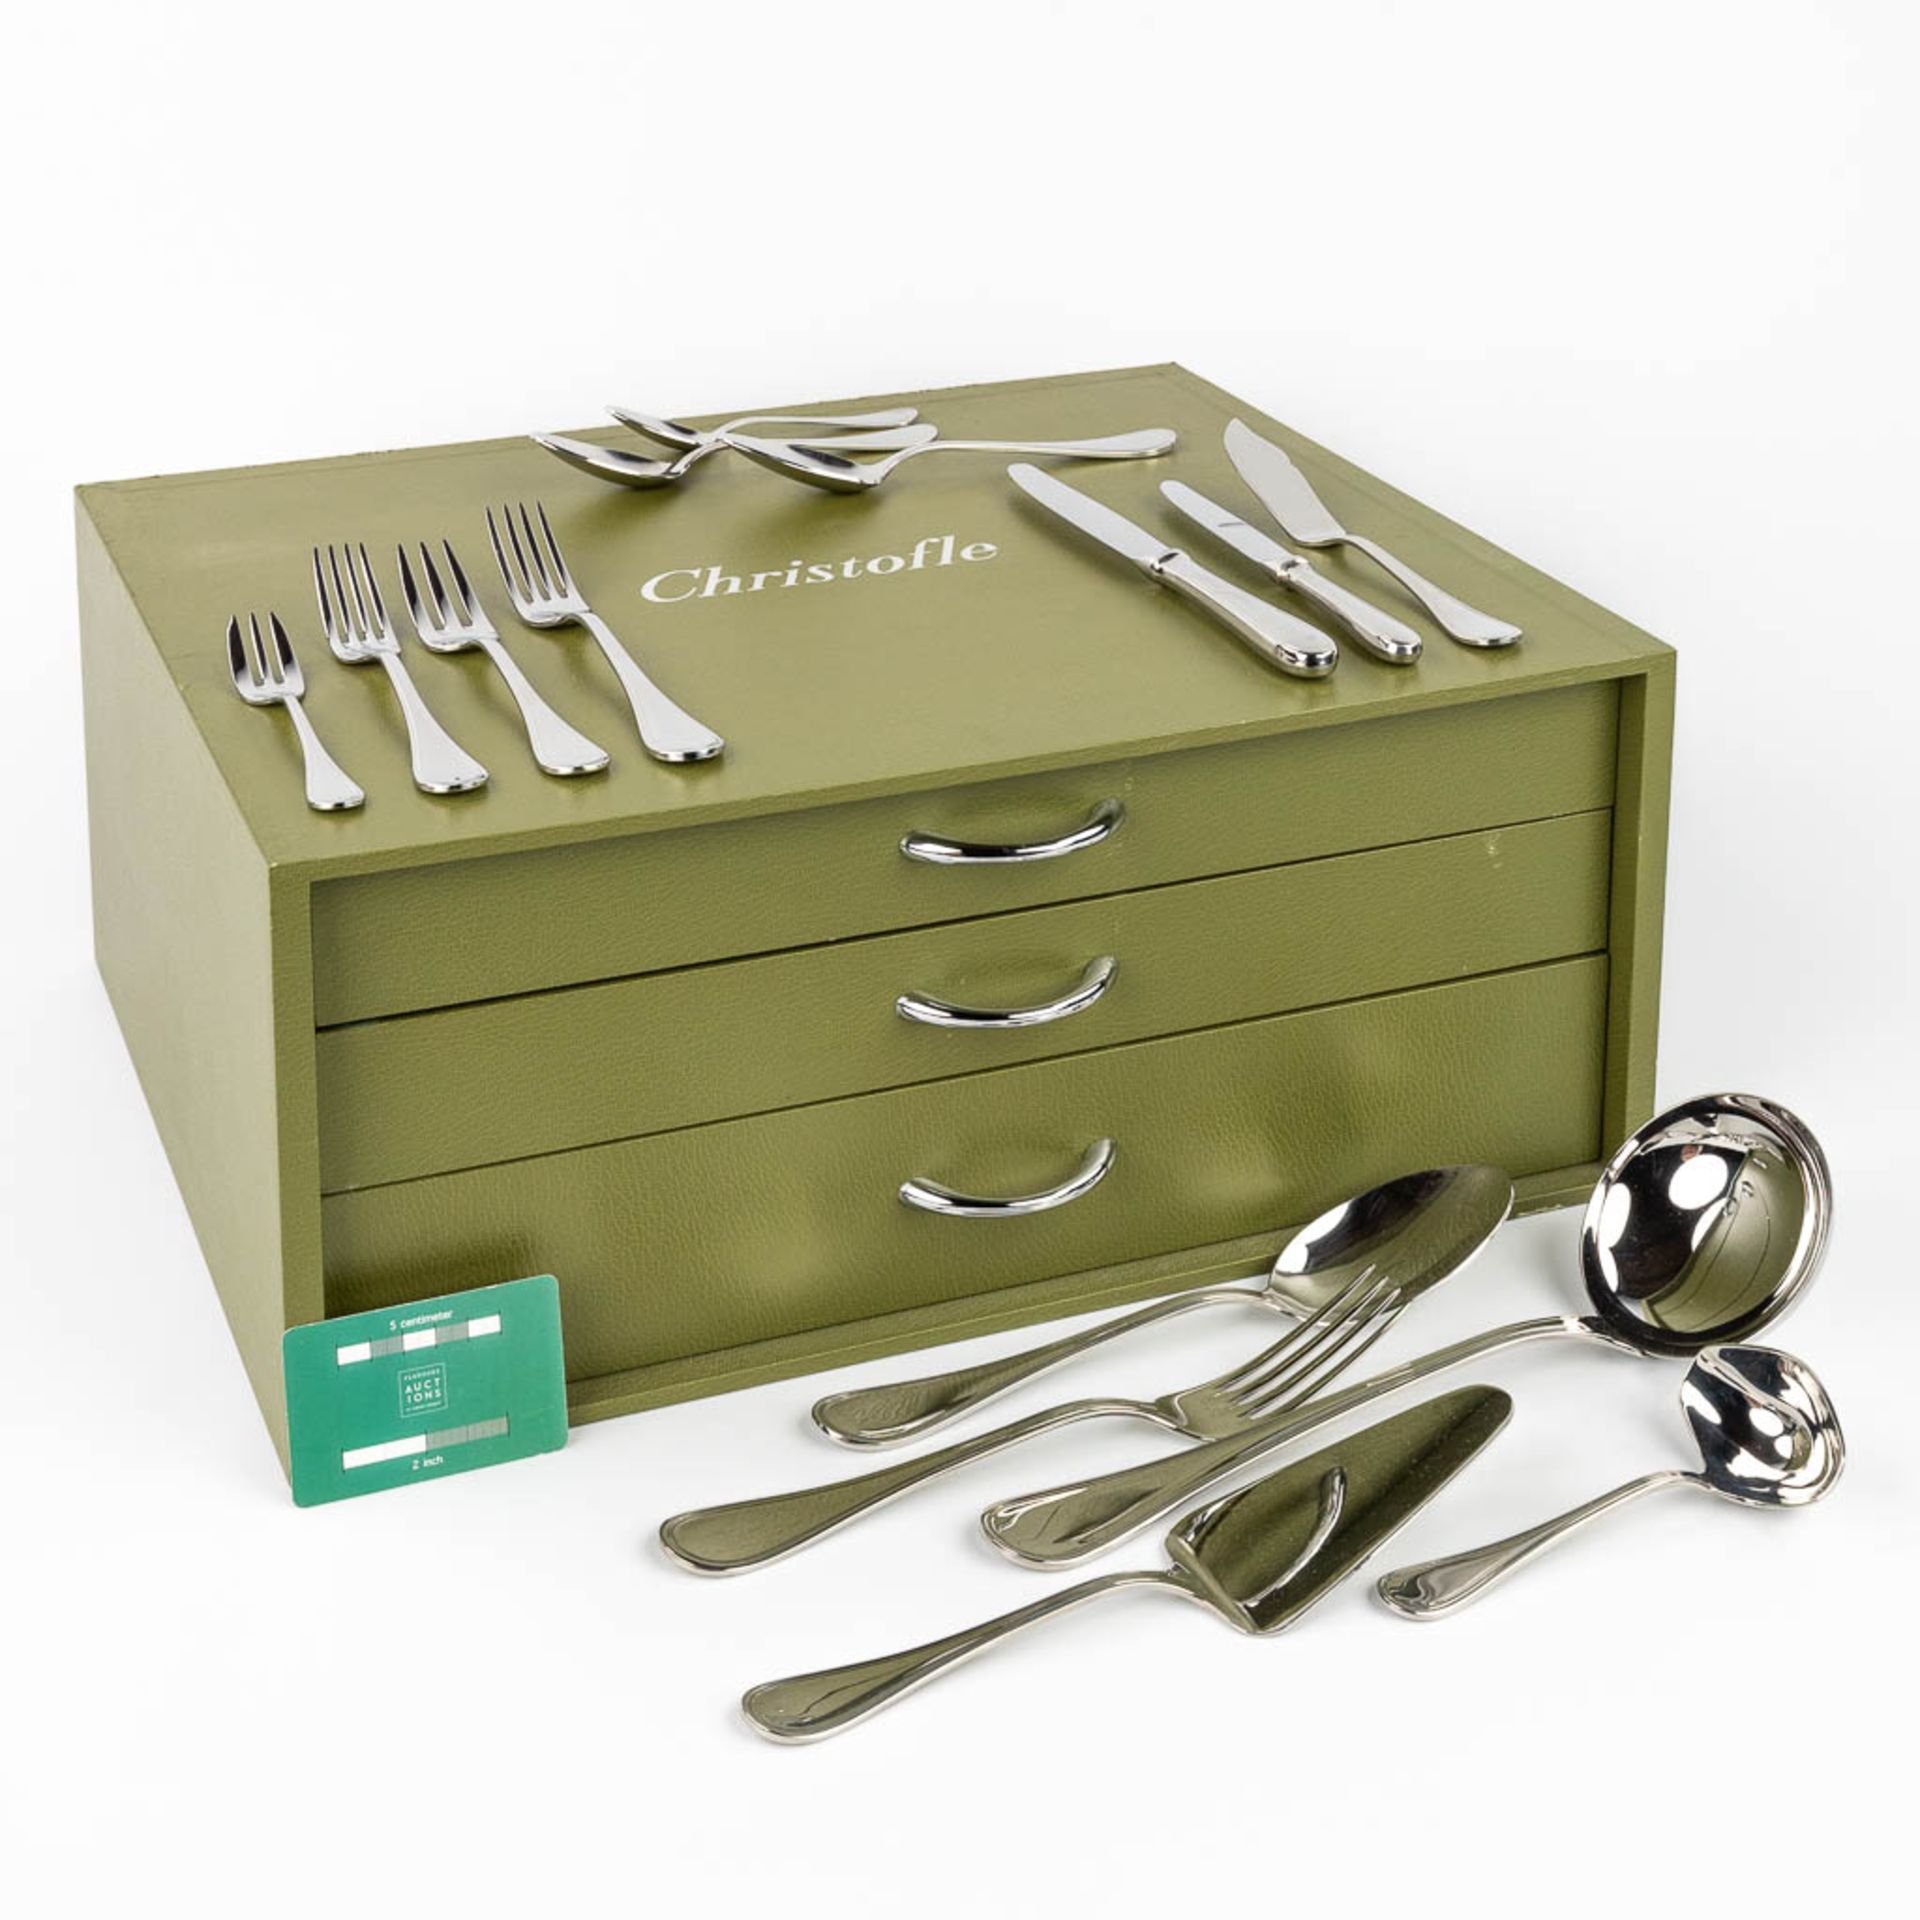 Christofle, model 'Albi' in an 'ambassador 125' case, a 124-piece flatware set, stainless steel. (L - Image 7 of 12